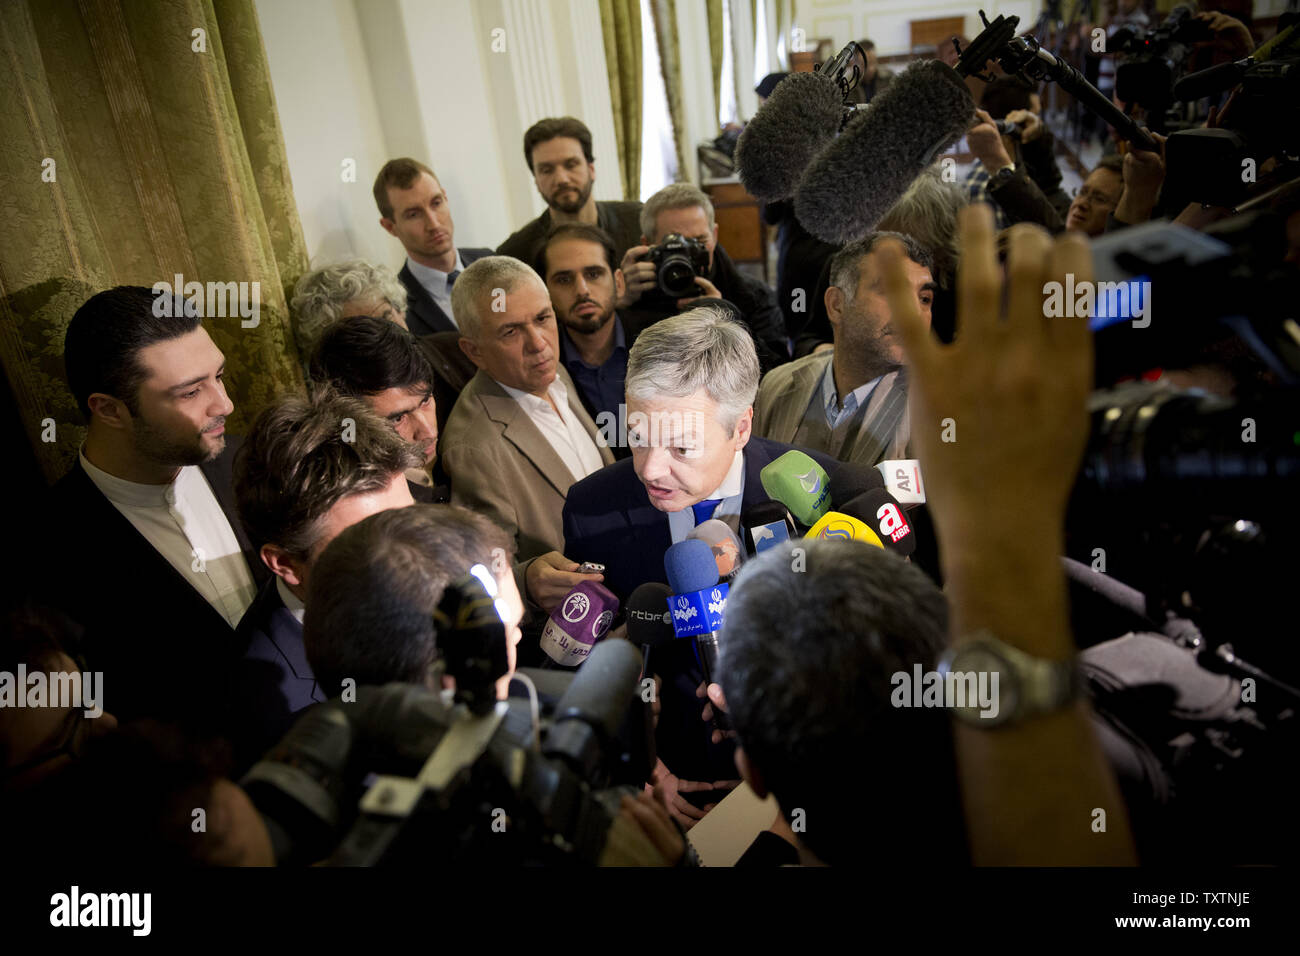 Belgian Foreign Minister Didier Reynders answers questions from reporters after his joint press conference with Iranian FM Mohammad Javad Zarif (not pictured) at the Iranian foreign ministry in Tehran, Iran on February 23, 2014. Reynders is the third foreign minister from the European Union to visit Iran in the past two months.     UPI/Maryam Rahmanian Stock Photo